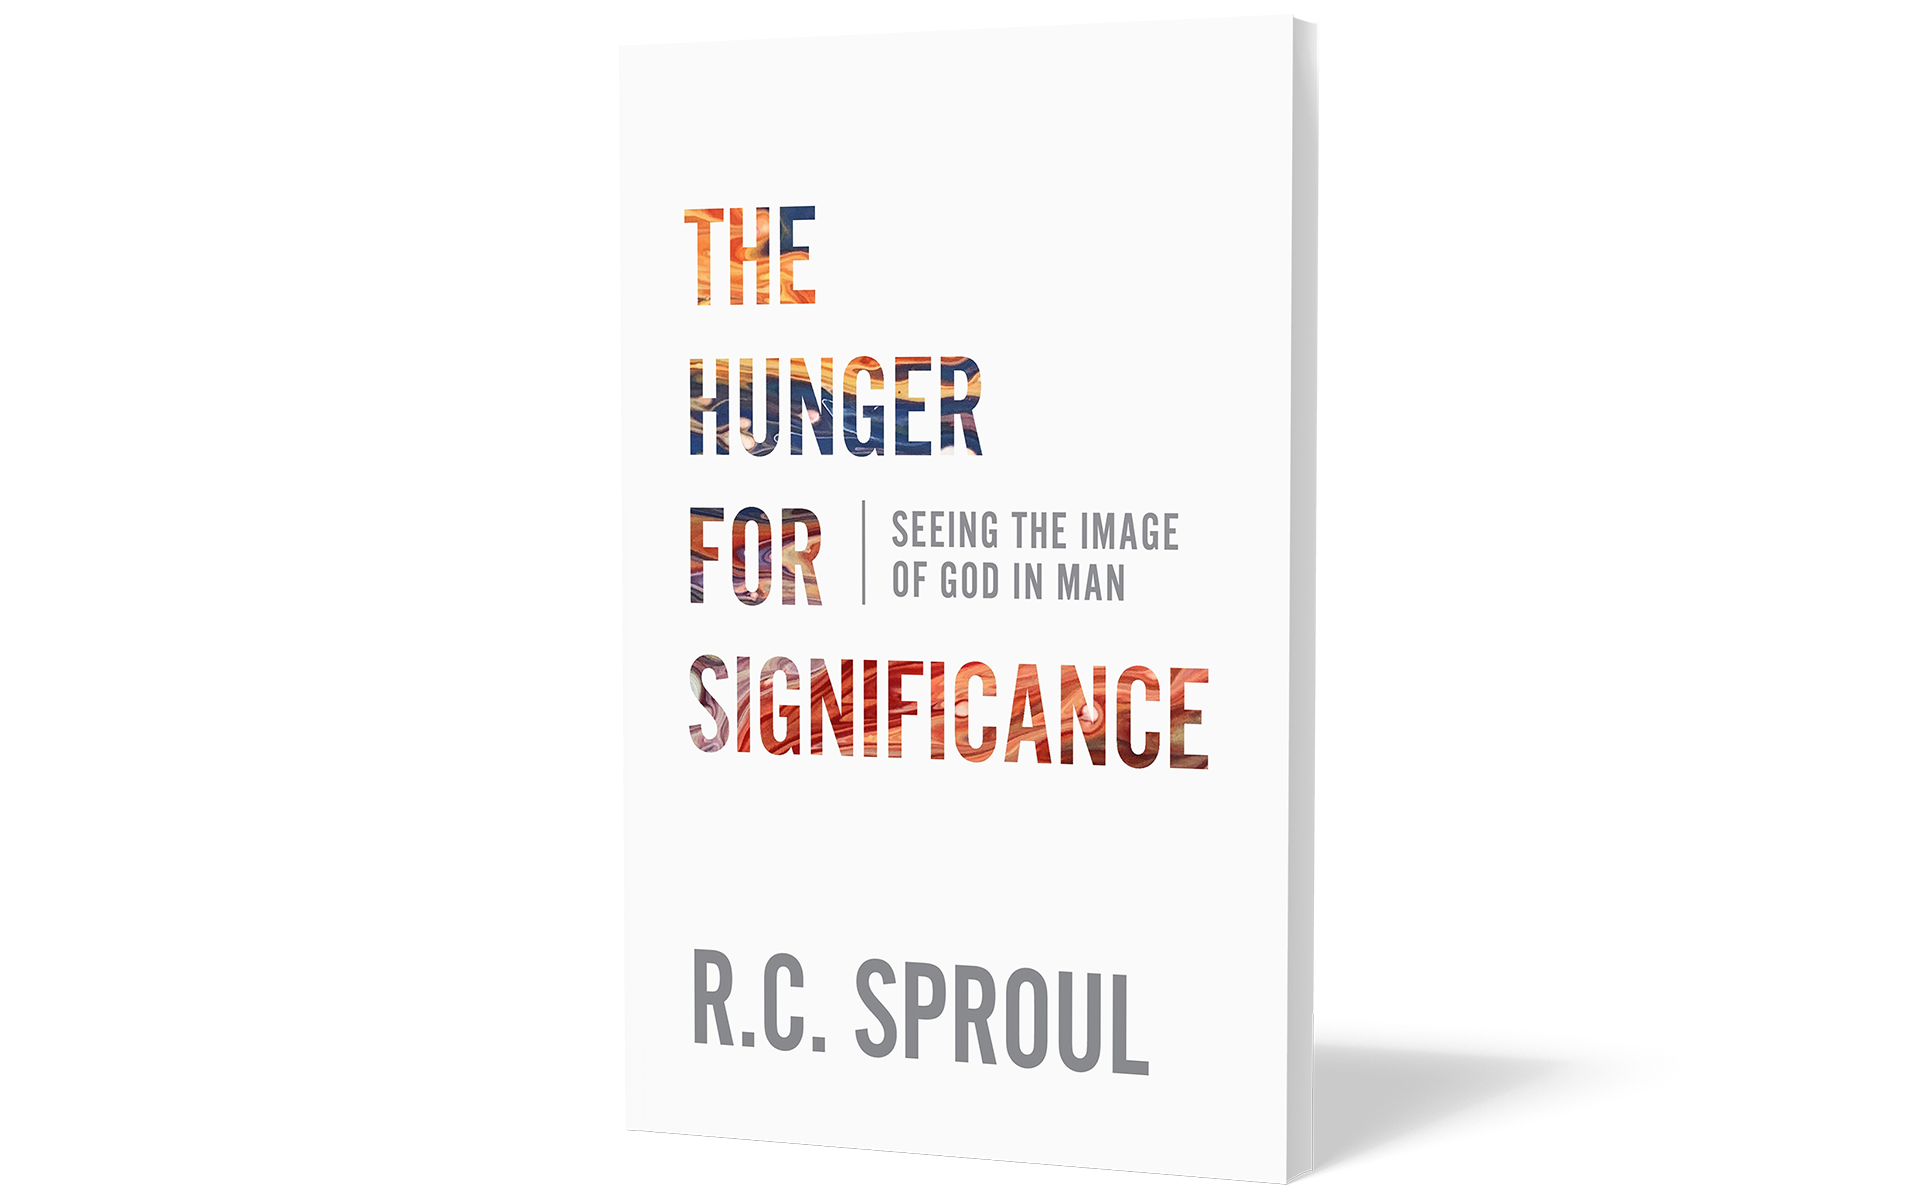 The Hunger for Significance: Seeing the Image of God in Man